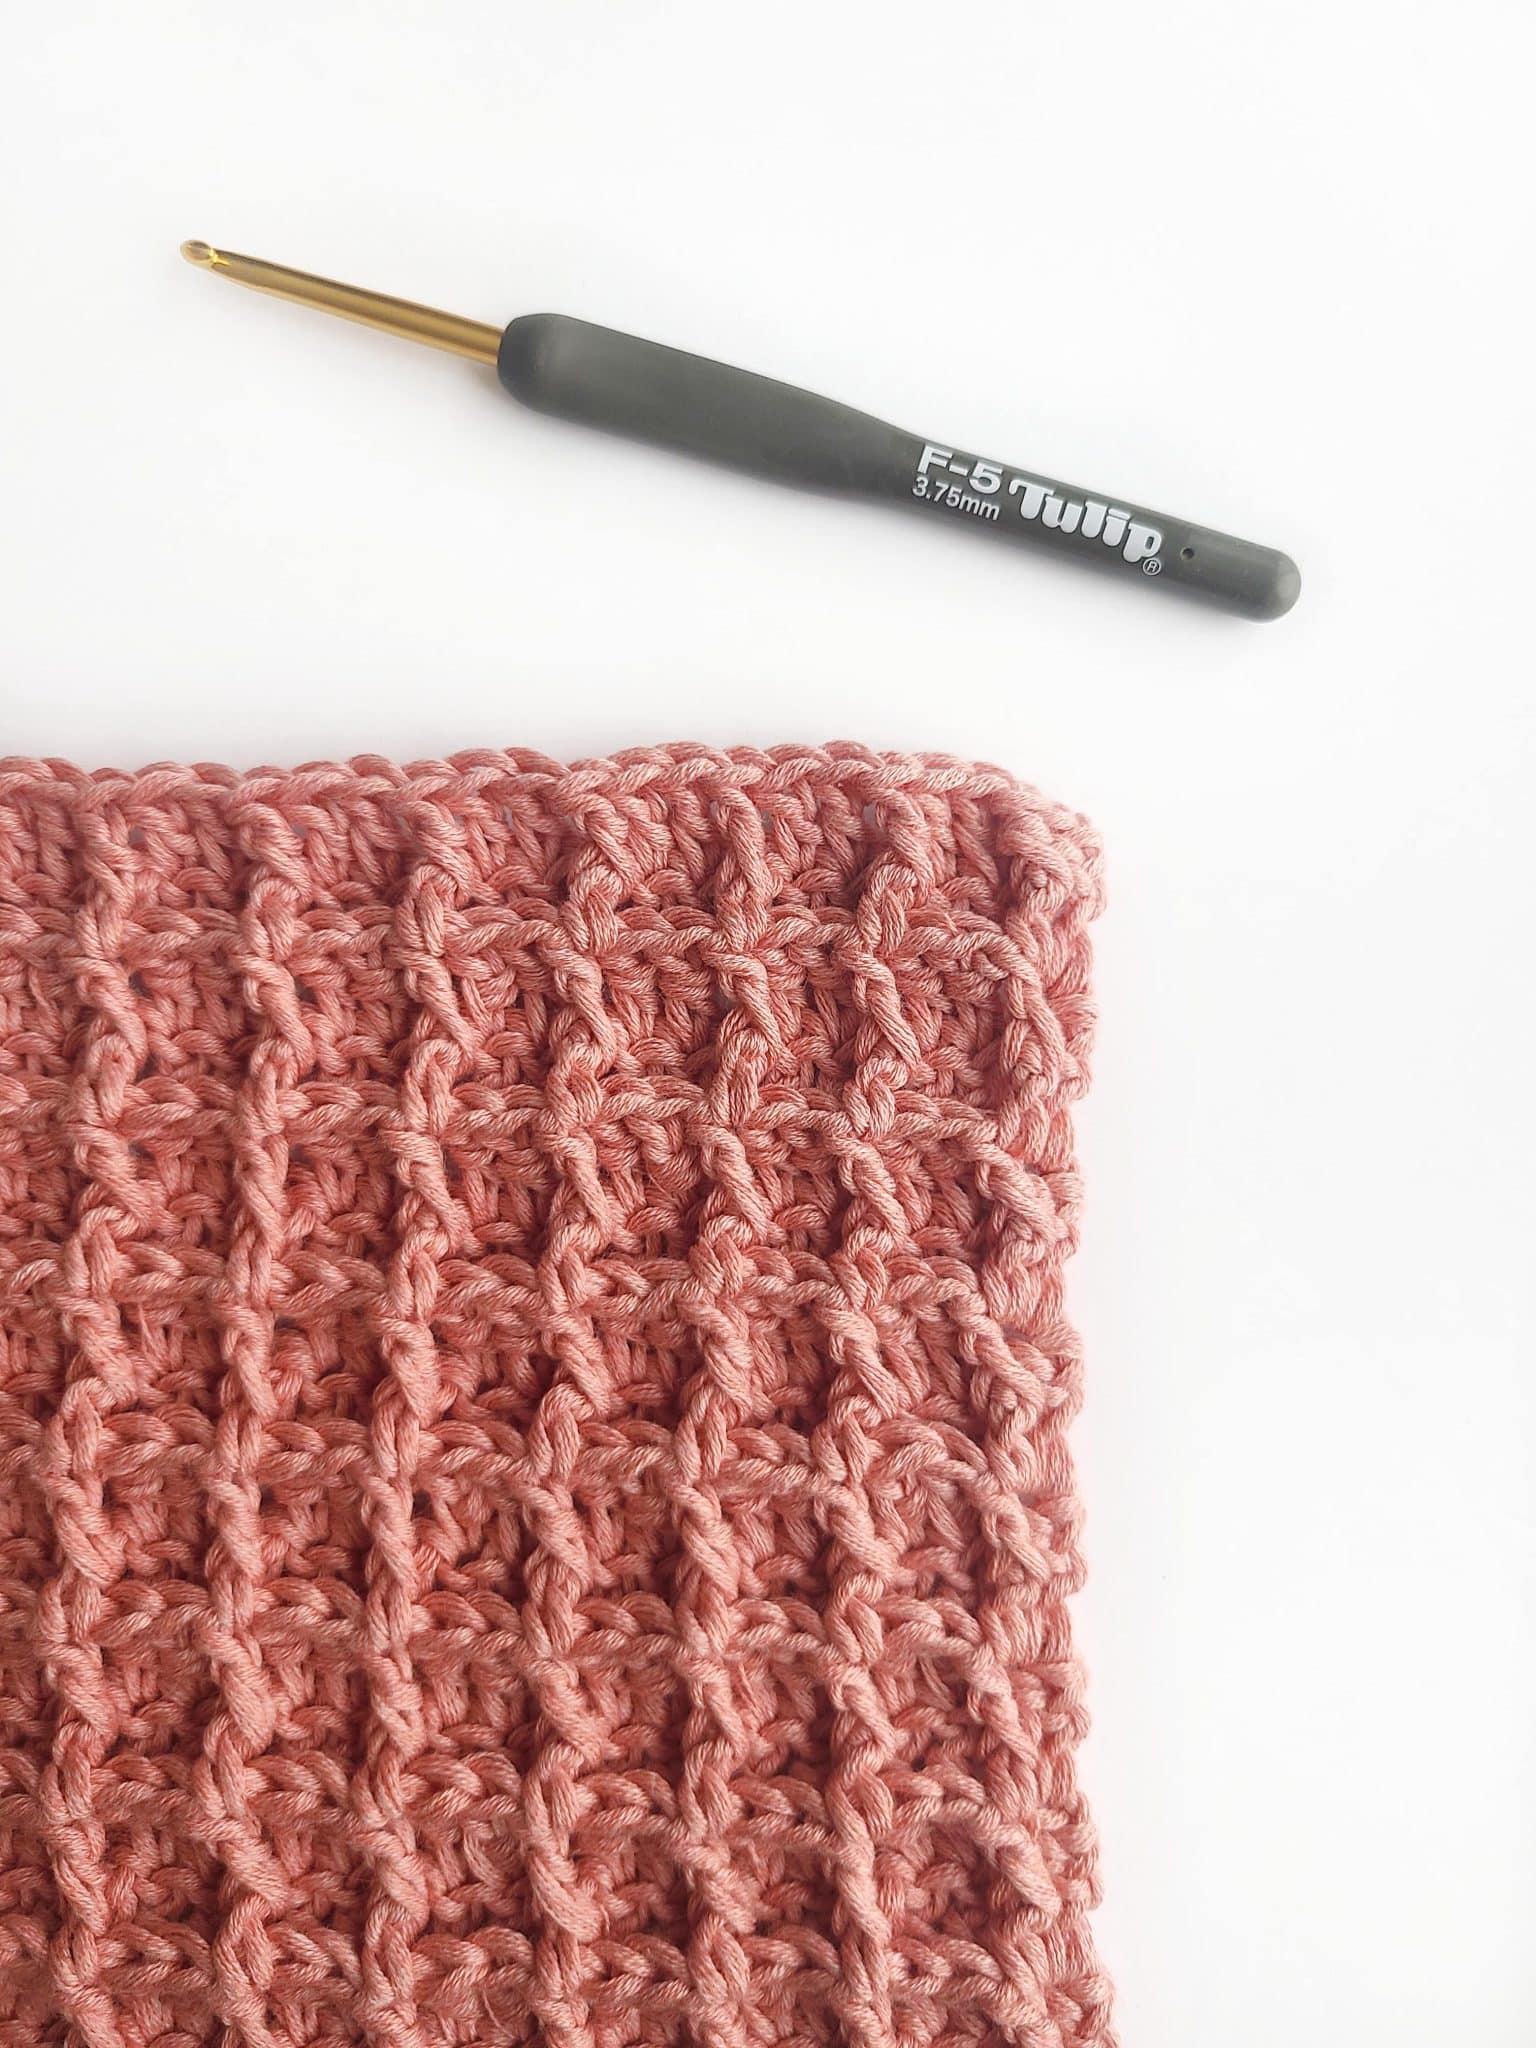 Add Texture to Your Projects: 5 Unique Textured Crochet Stitches